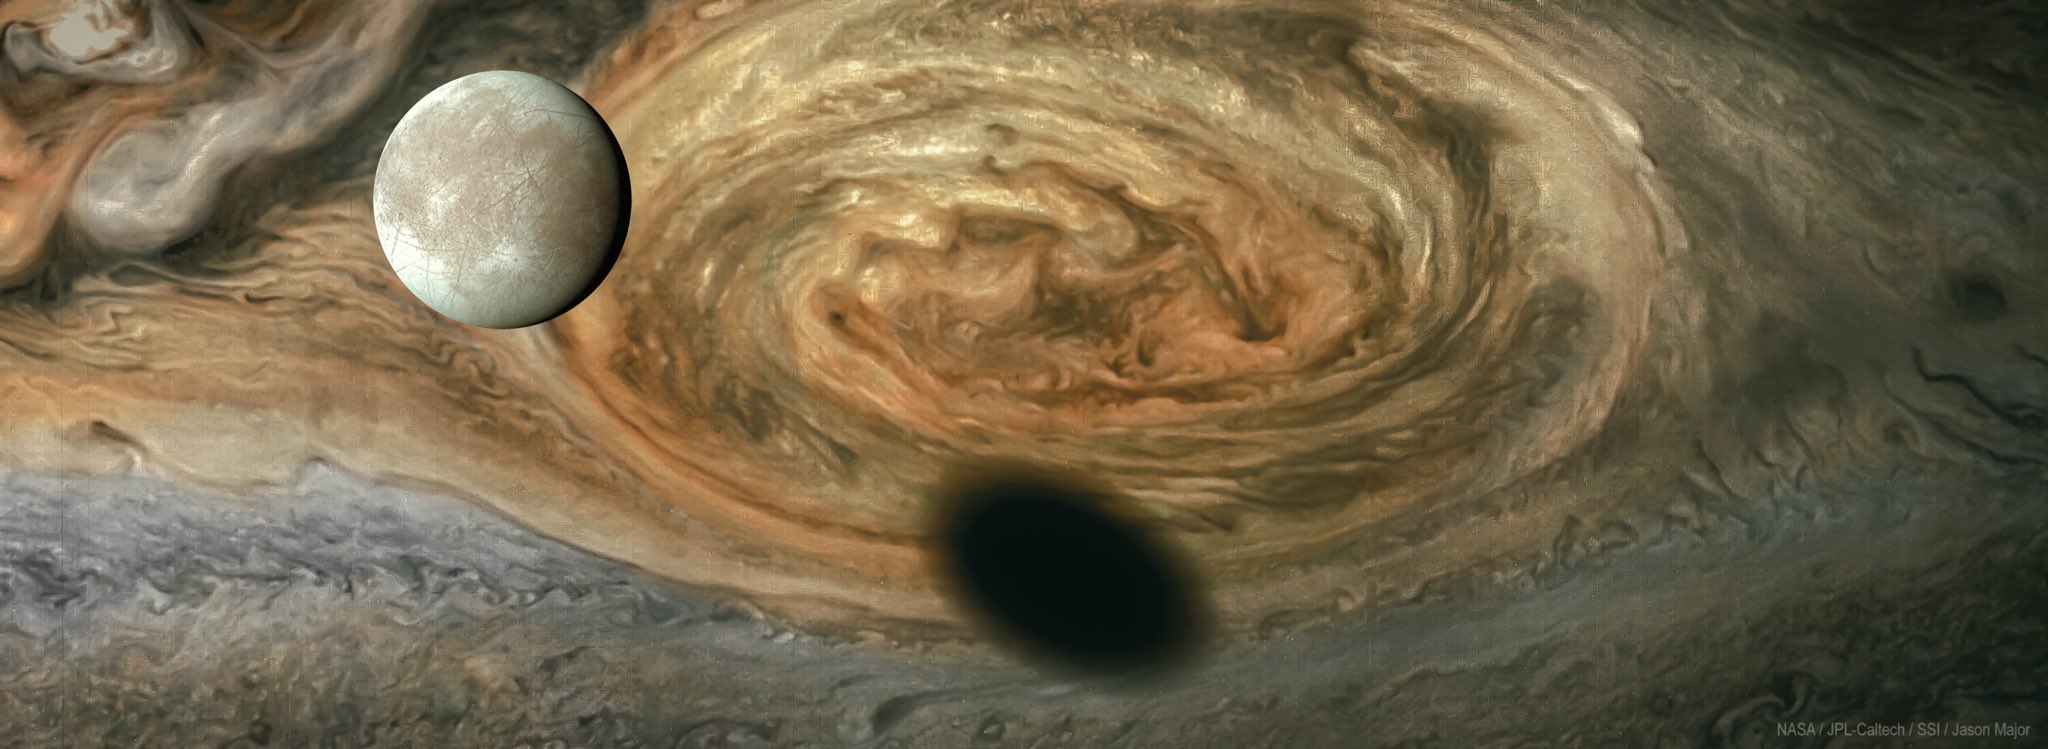 Europa casting its shadow onto Jupiter's Red spot. Captured by NASA's Galileo spacecraft on May 2000.jpg